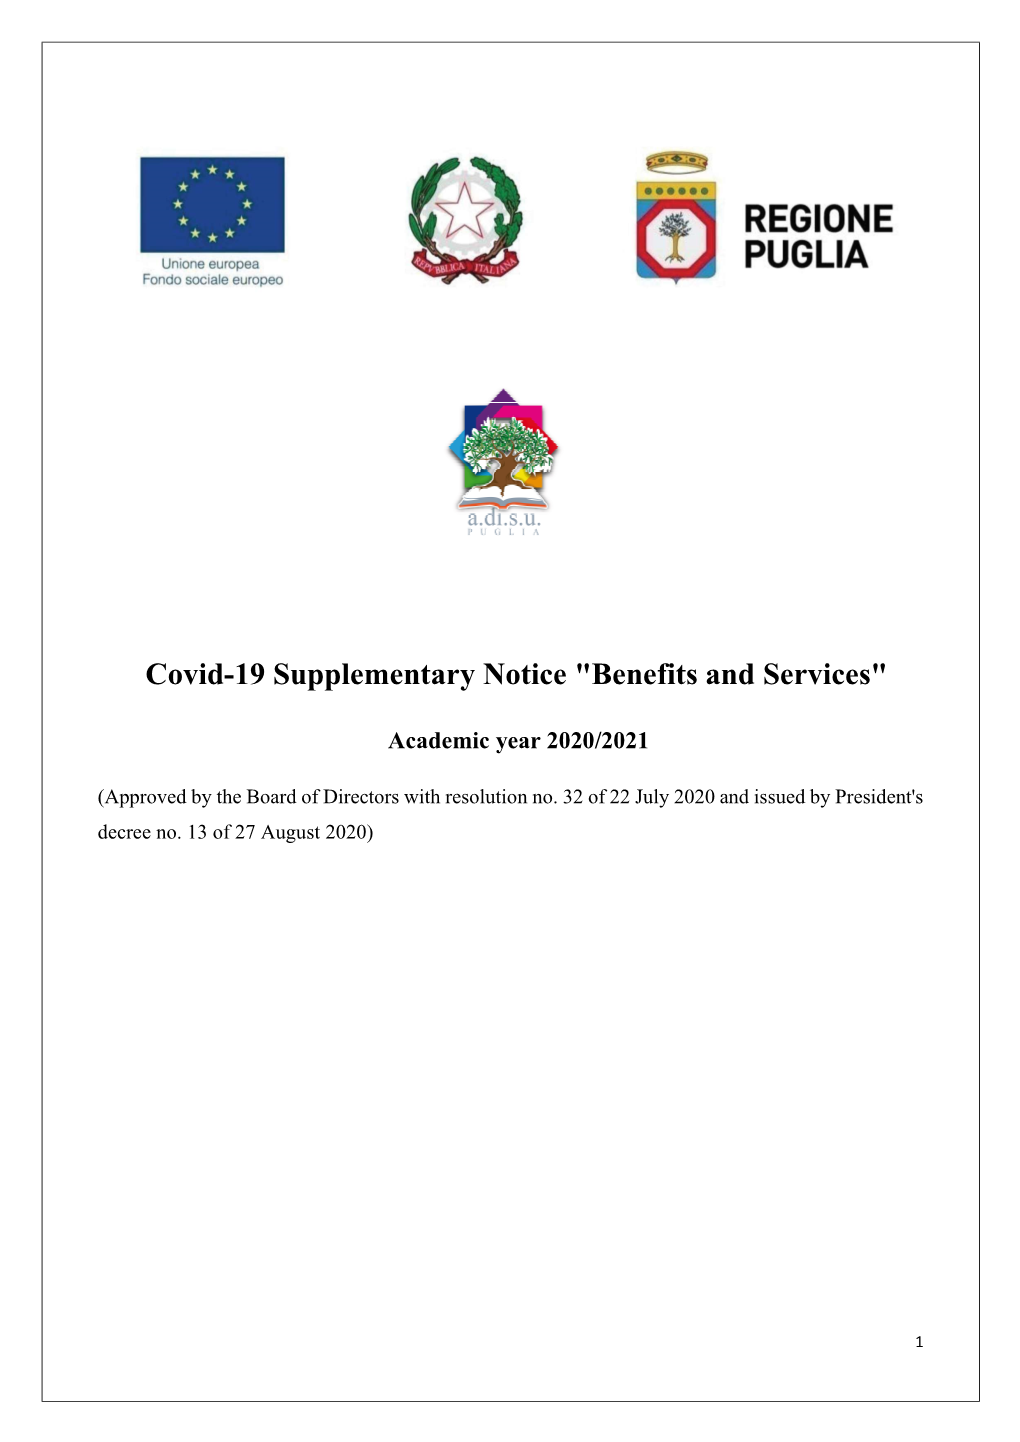 Covid-19 Supplementary Notice "Benefits and Services"